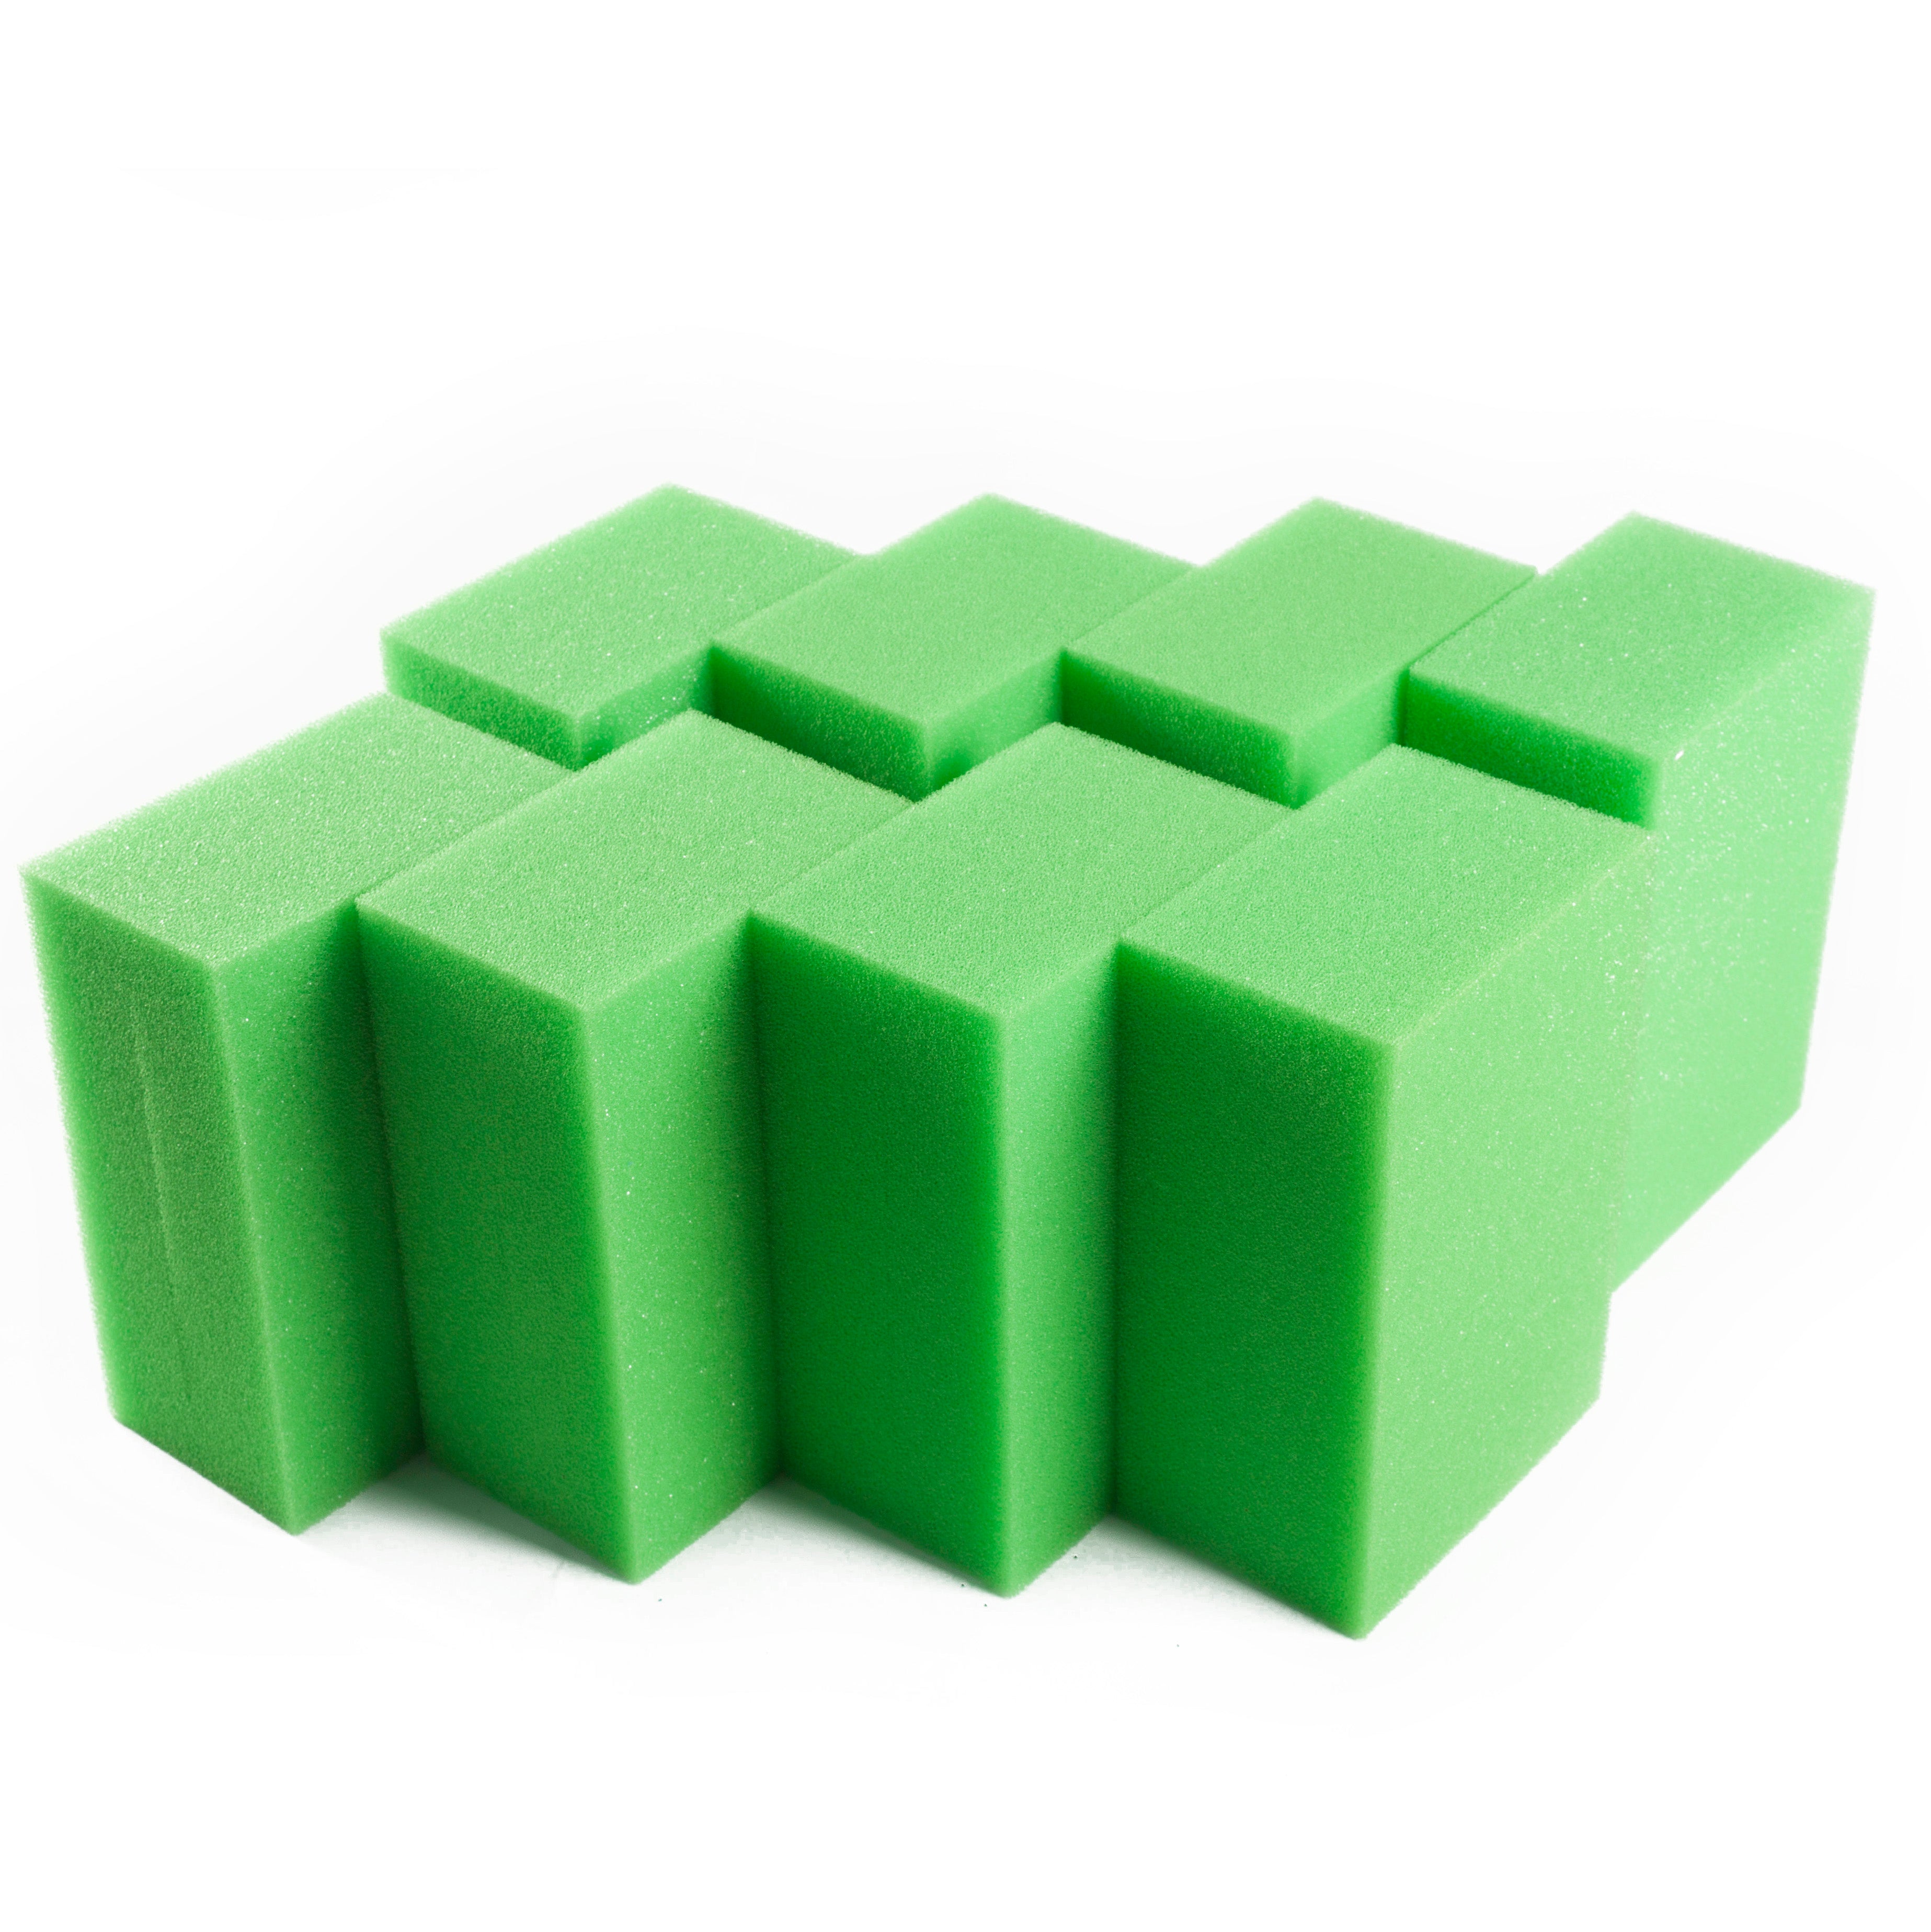 LTWHOME Fine Green Foam Filter Sponge Fit for Oase Biotec Screenmatic 18 & 36 Pond Filter (Pack of 8)